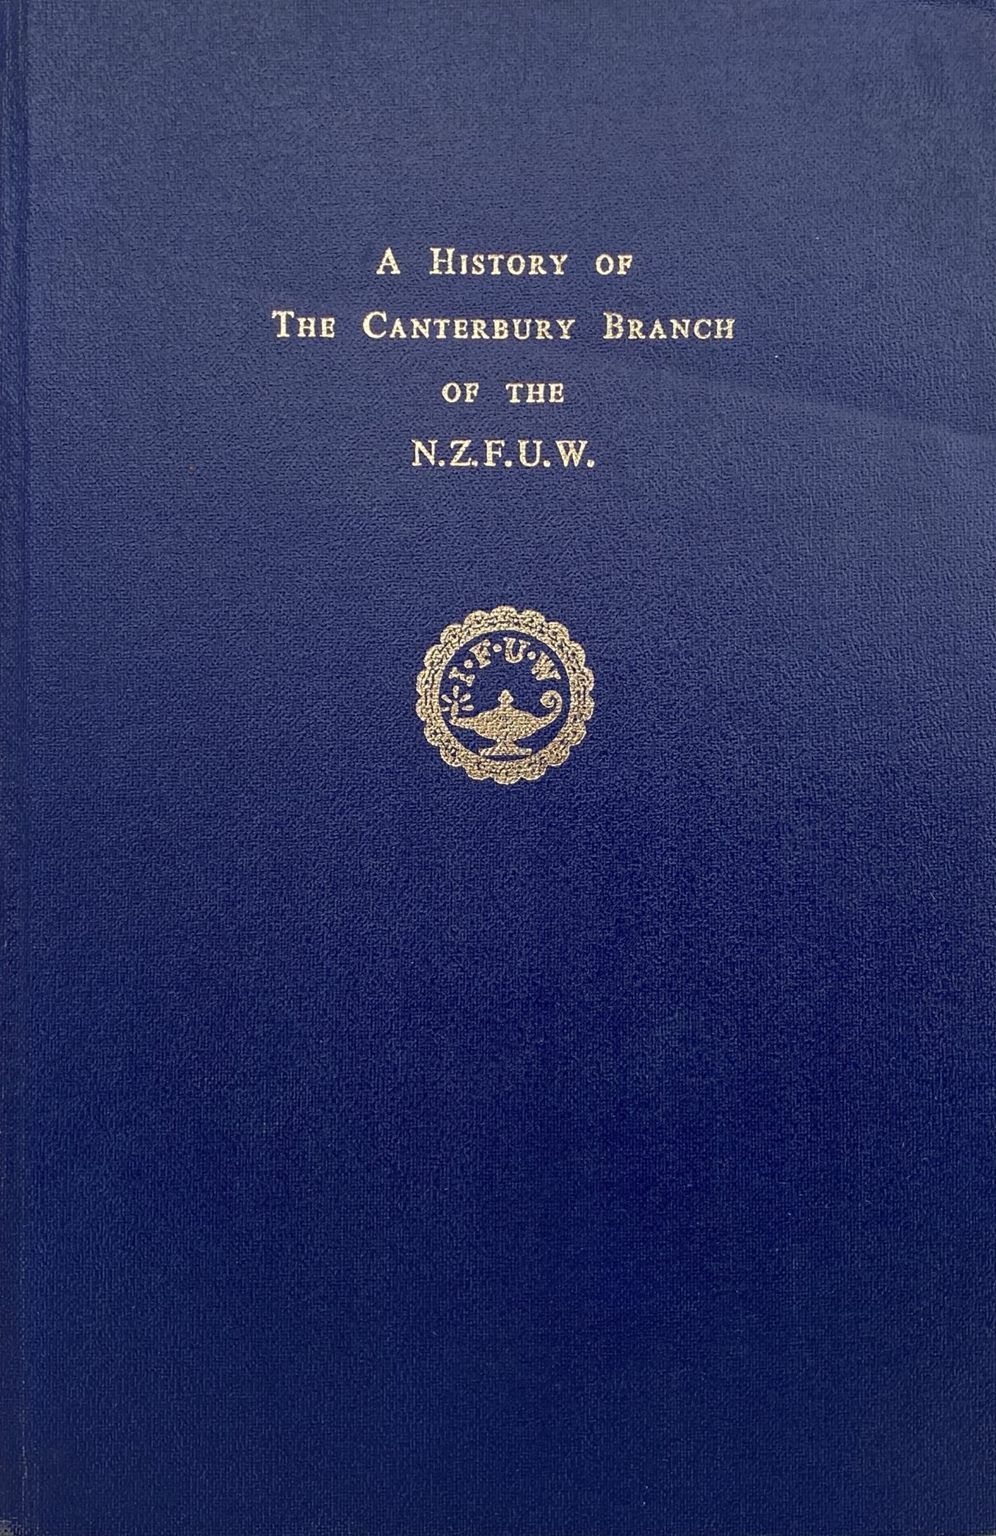 A History Of The Canterbury Branch of the N.Z.F.U.W.